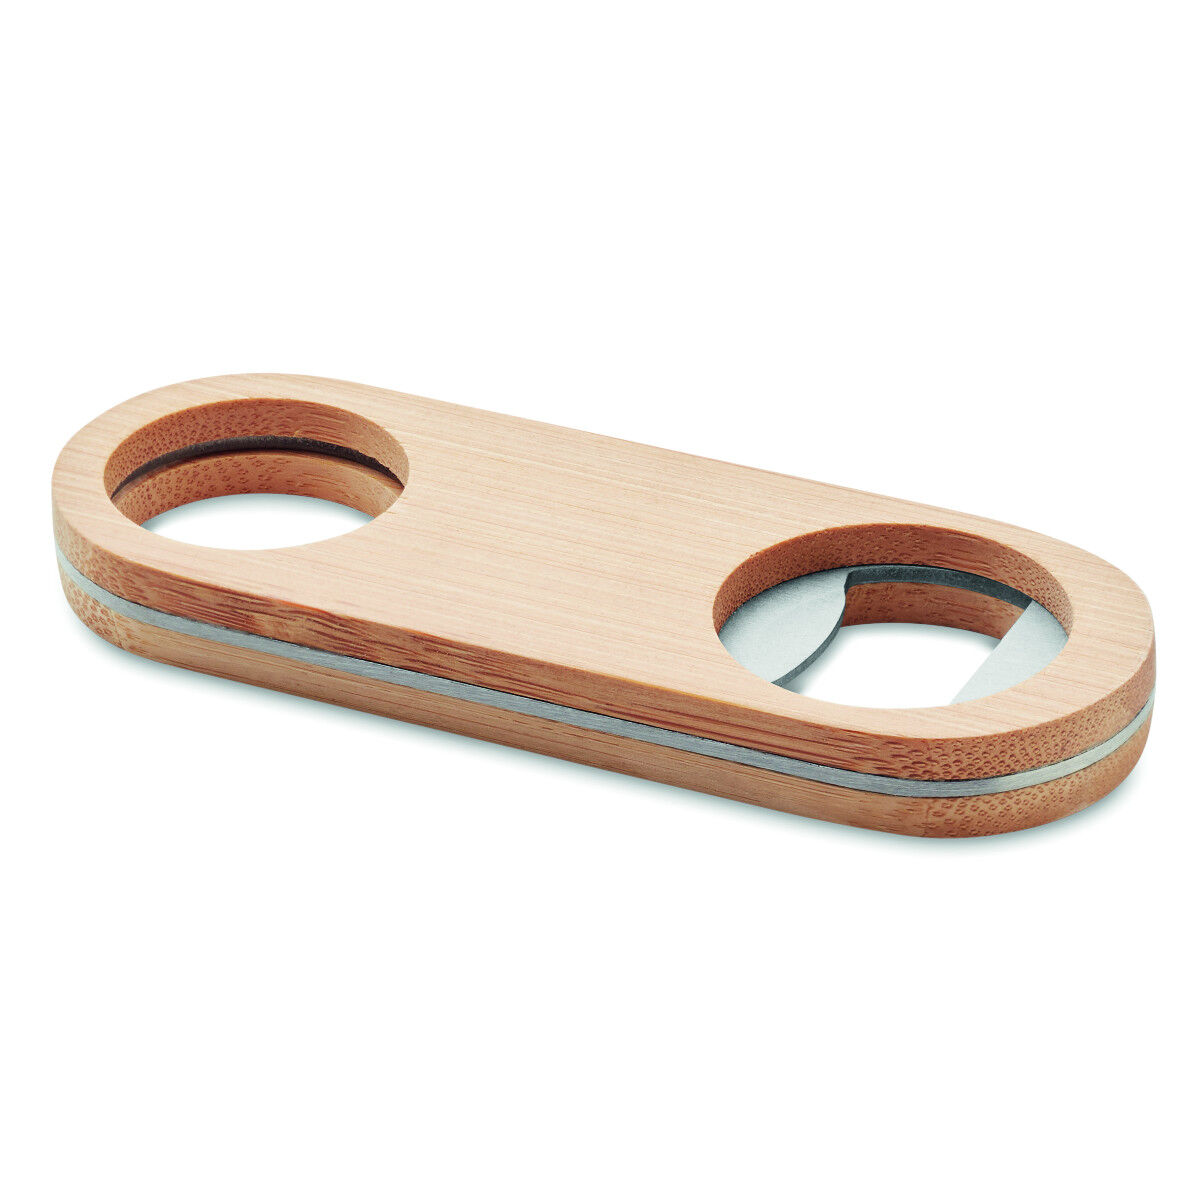 Bottle Opener in Stainless Steel with Cork Handle